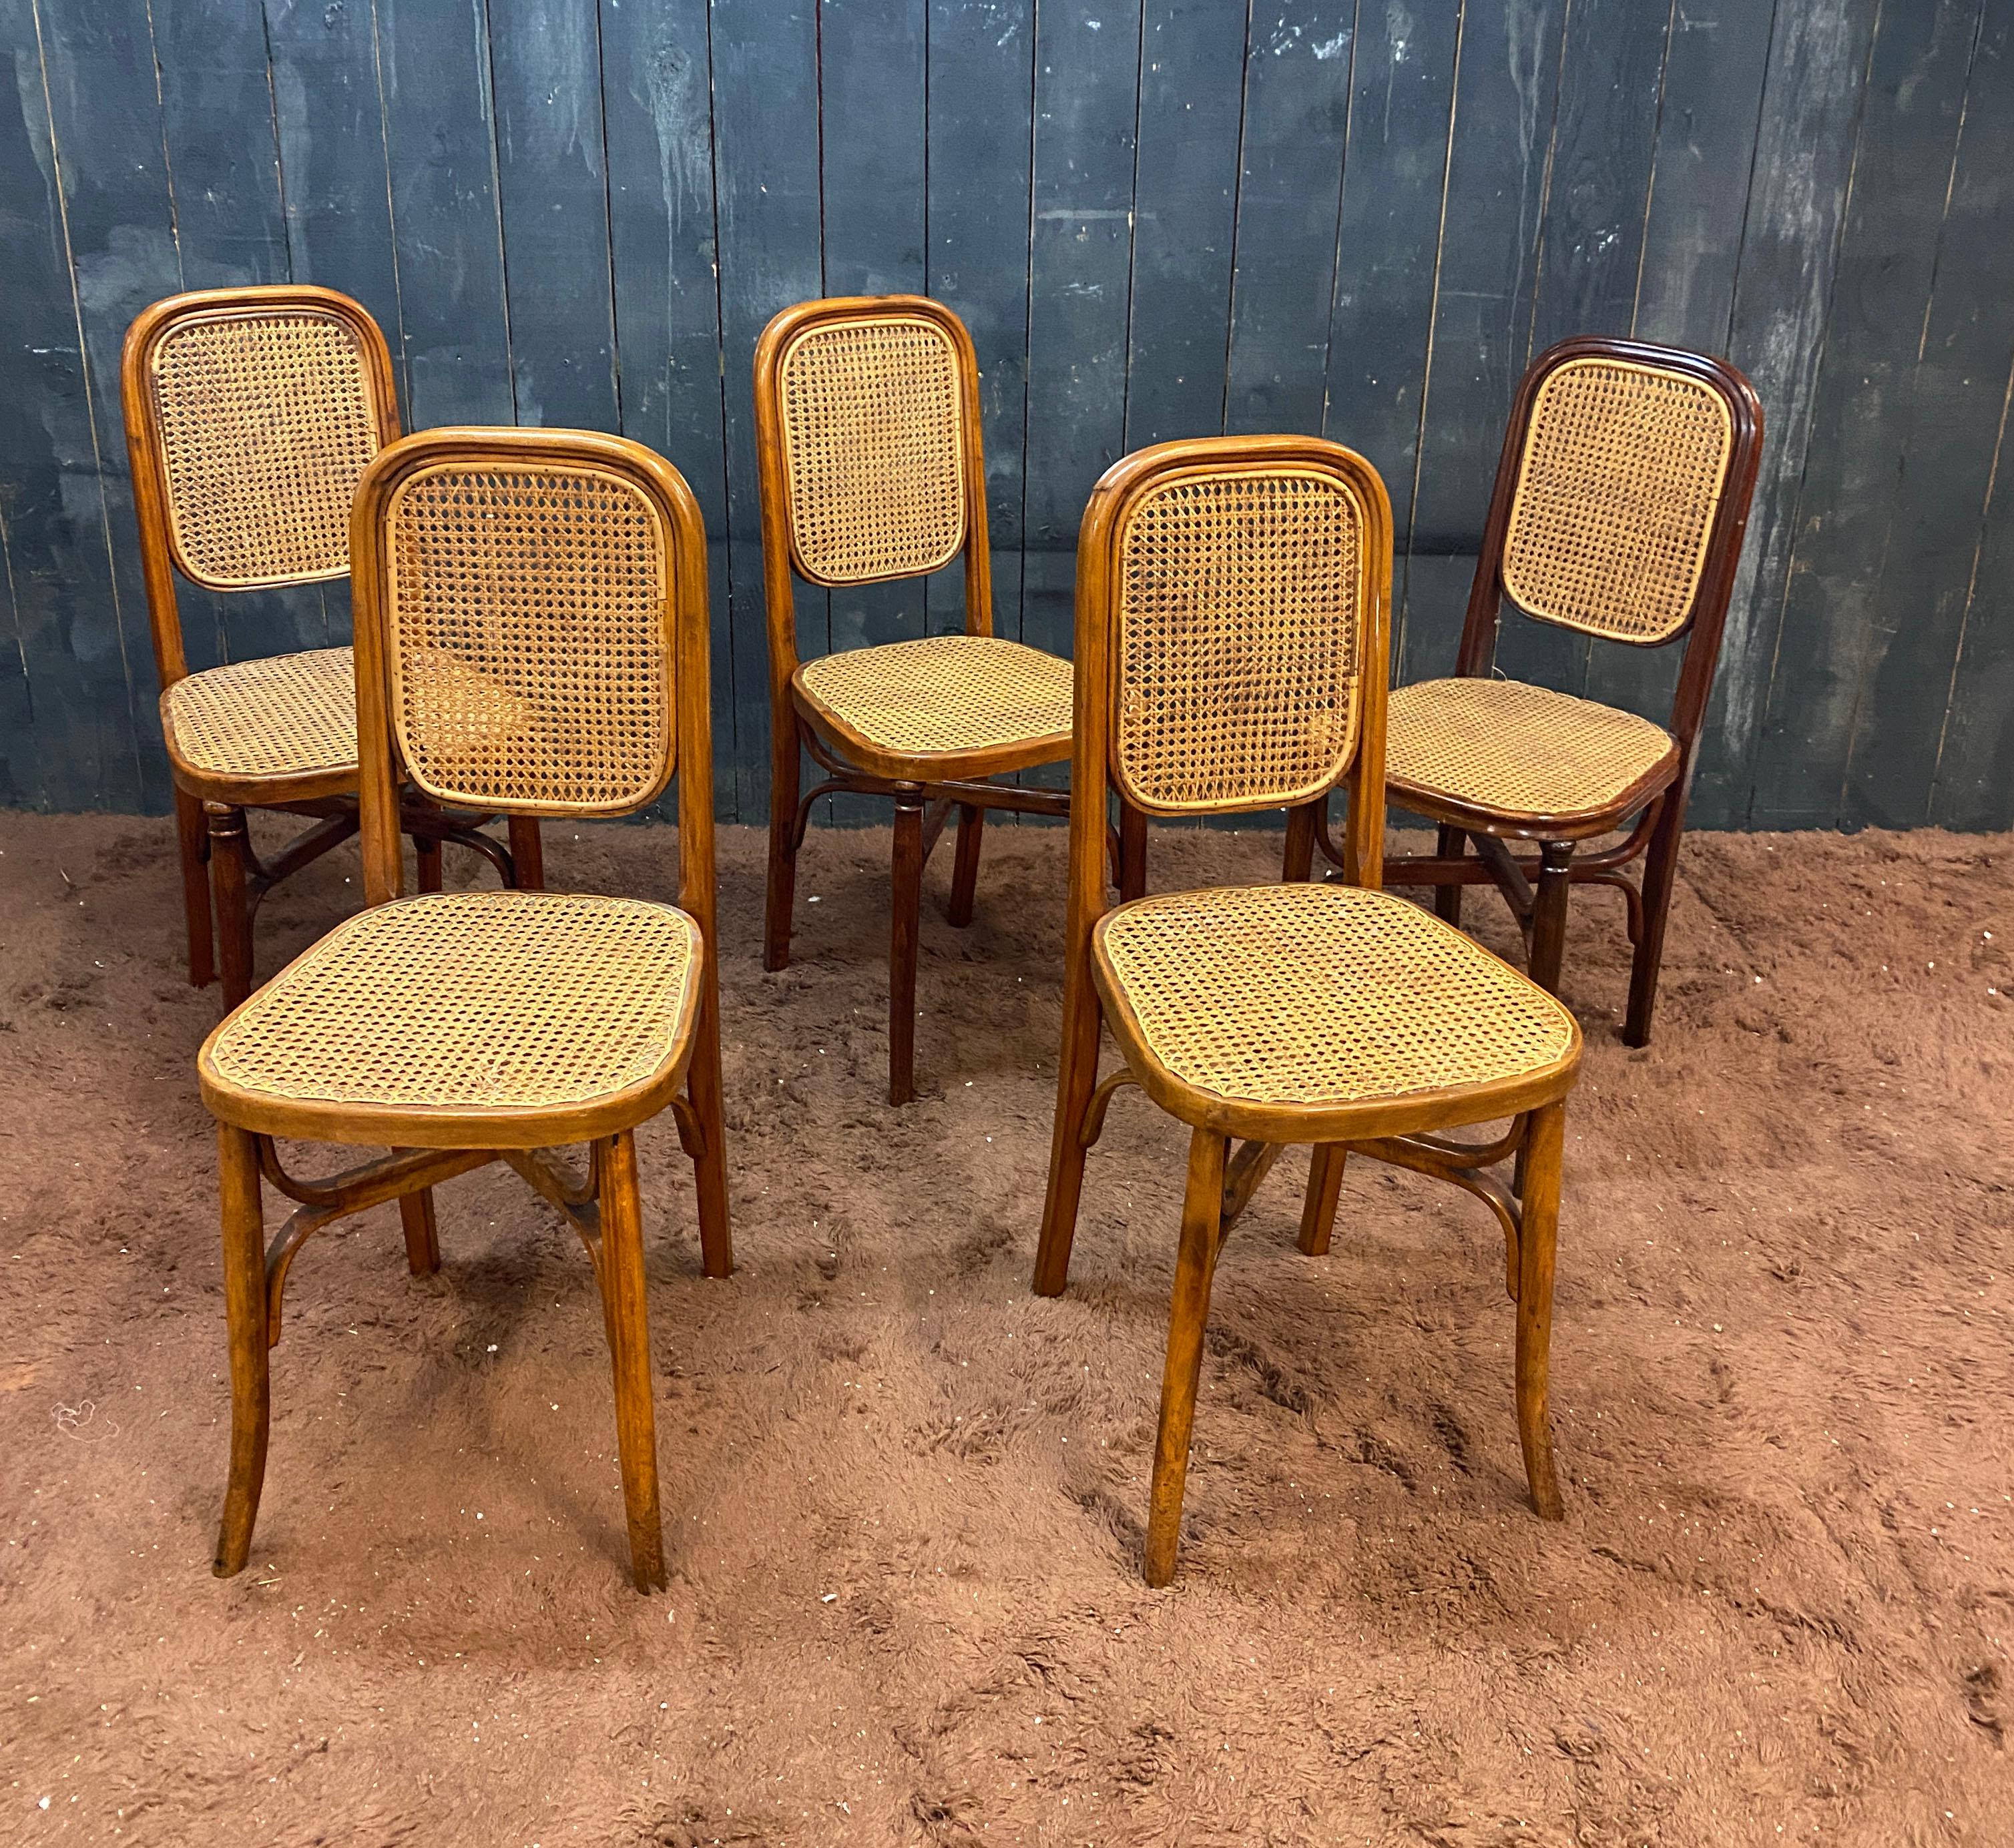 5 Thonet style chairs circa 1900
good general condition, no restoration required